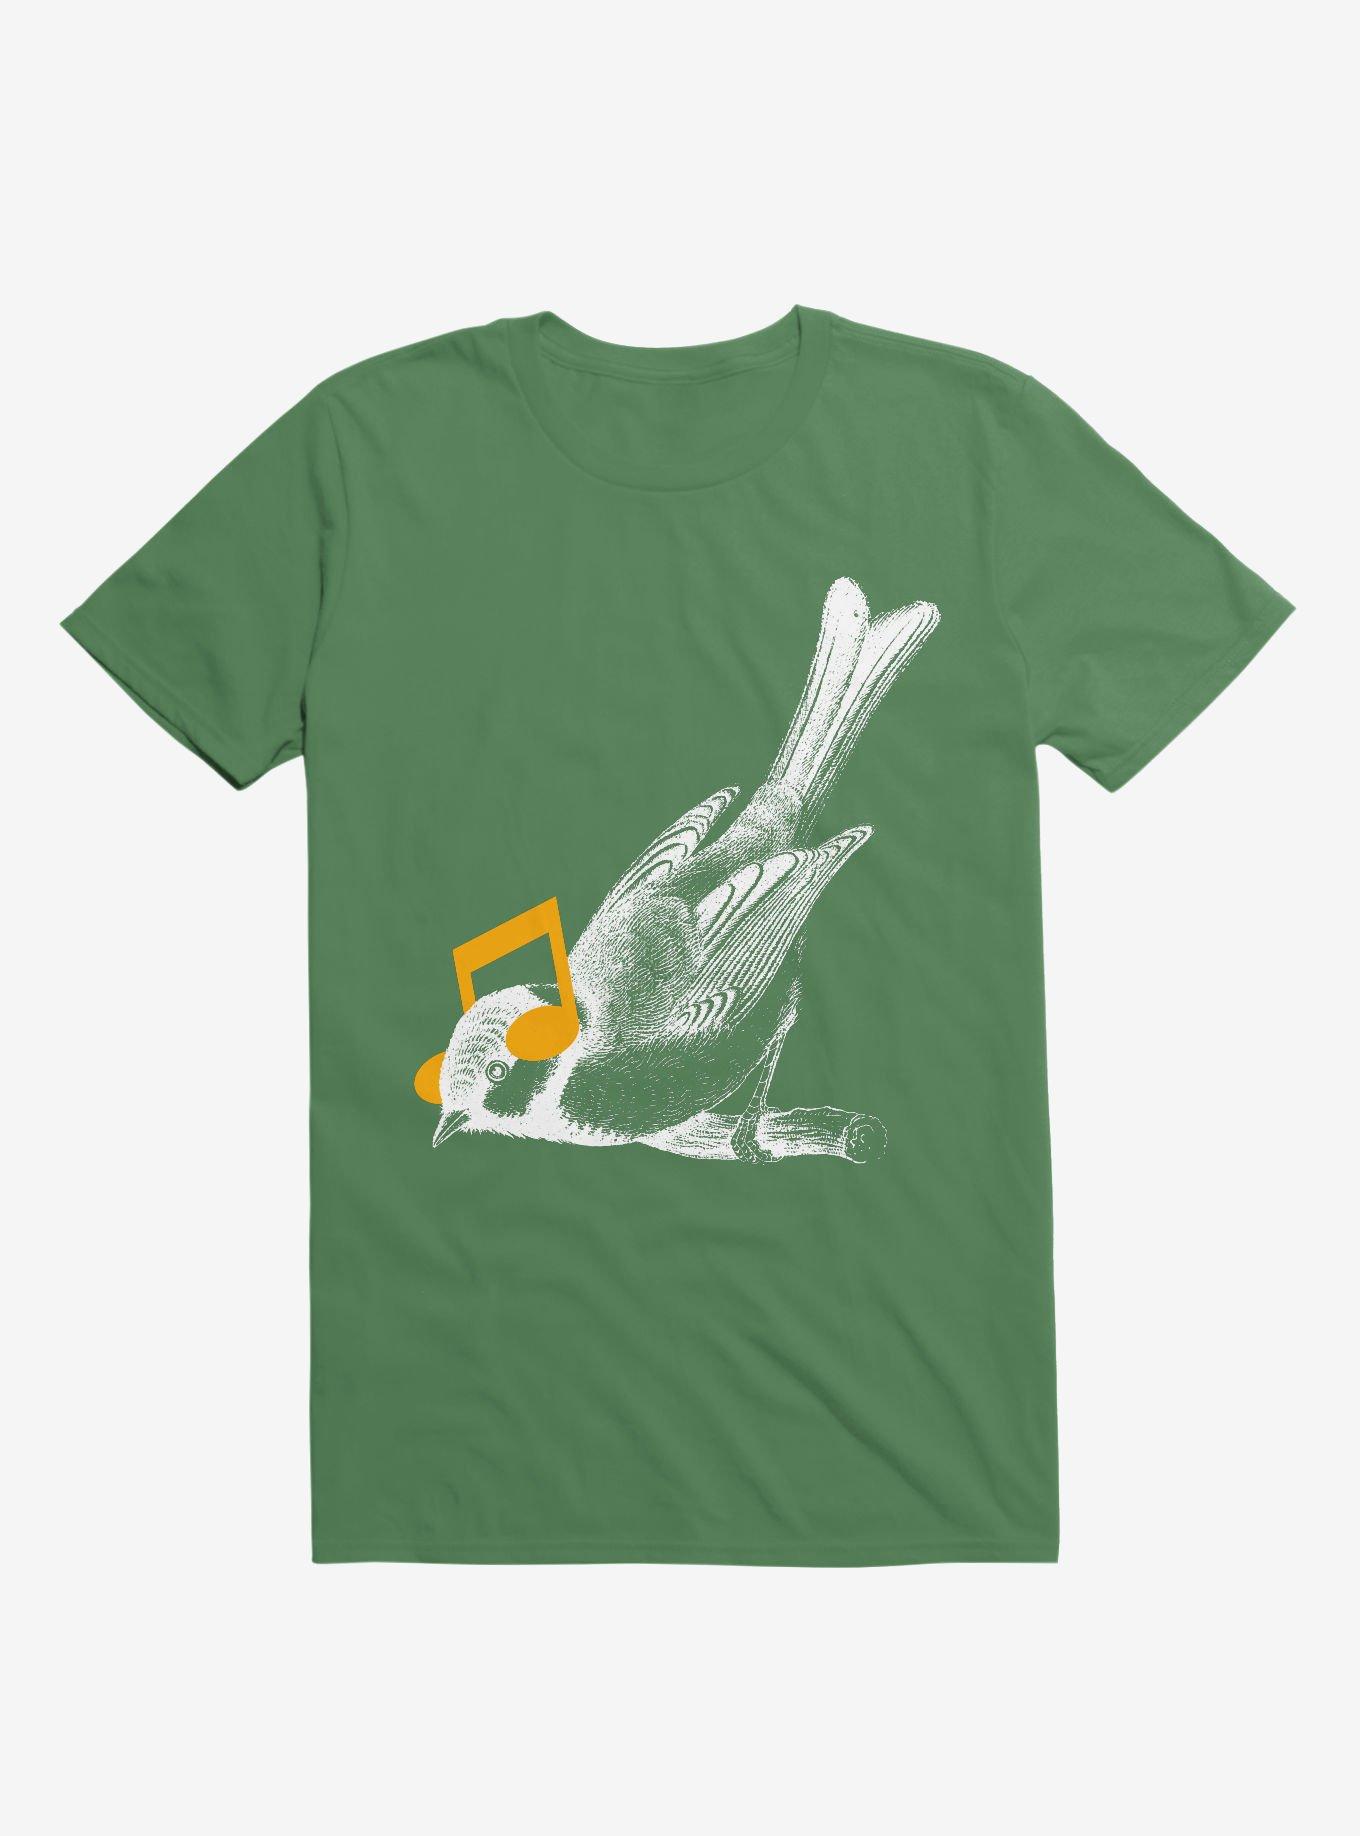 Listening To Your Heart T-Shirt, KELLY GREEN, hi-res